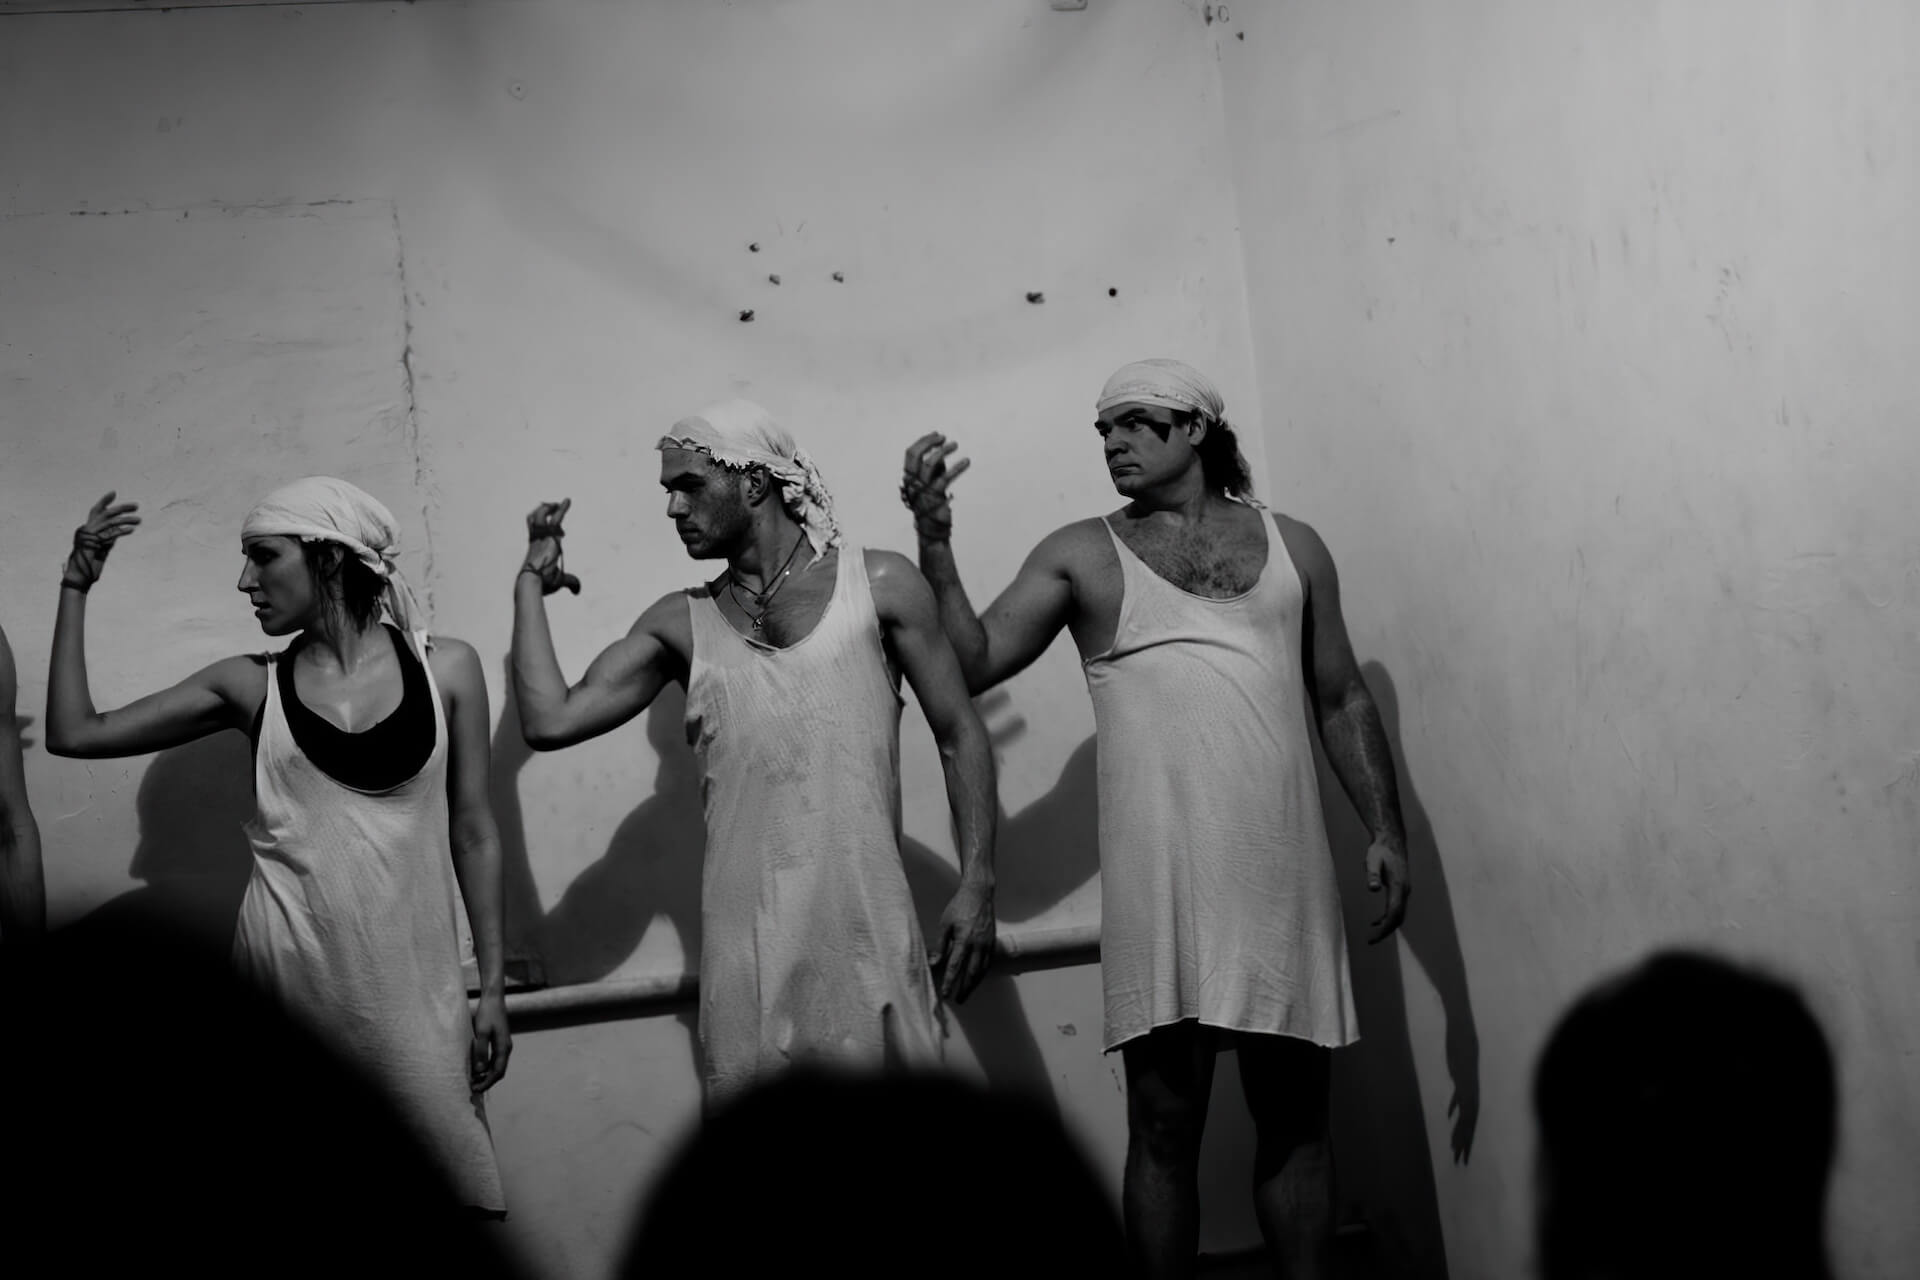 Black and white image of three performers in white garments looking at their grasping right hands.